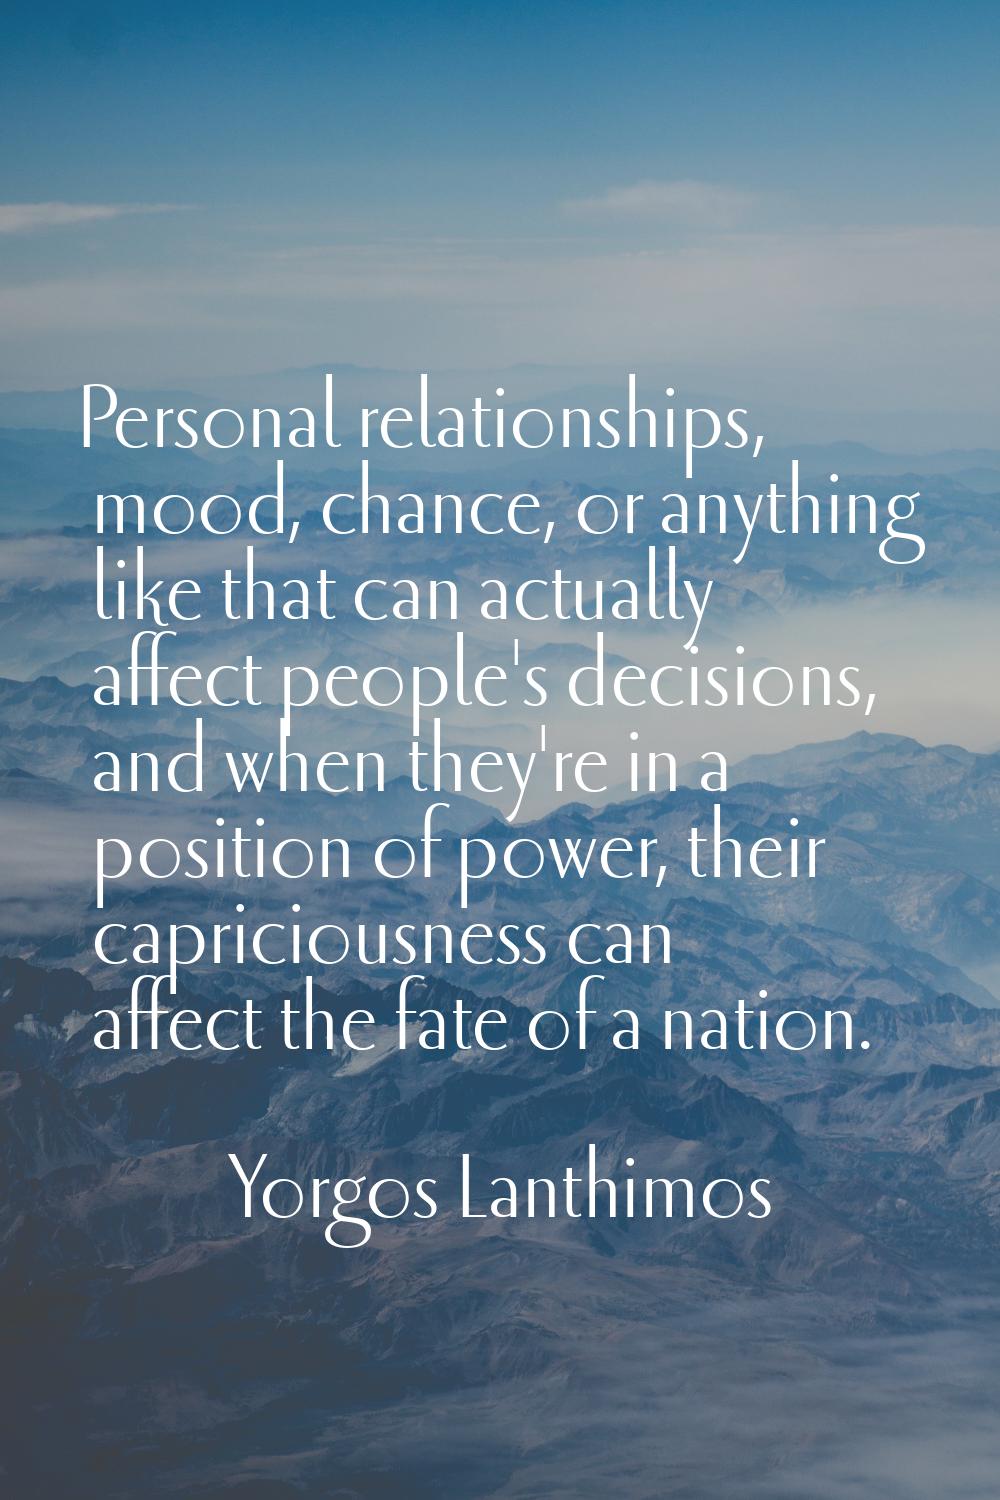 Personal relationships, mood, chance, or anything like that can actually affect people's decisions,